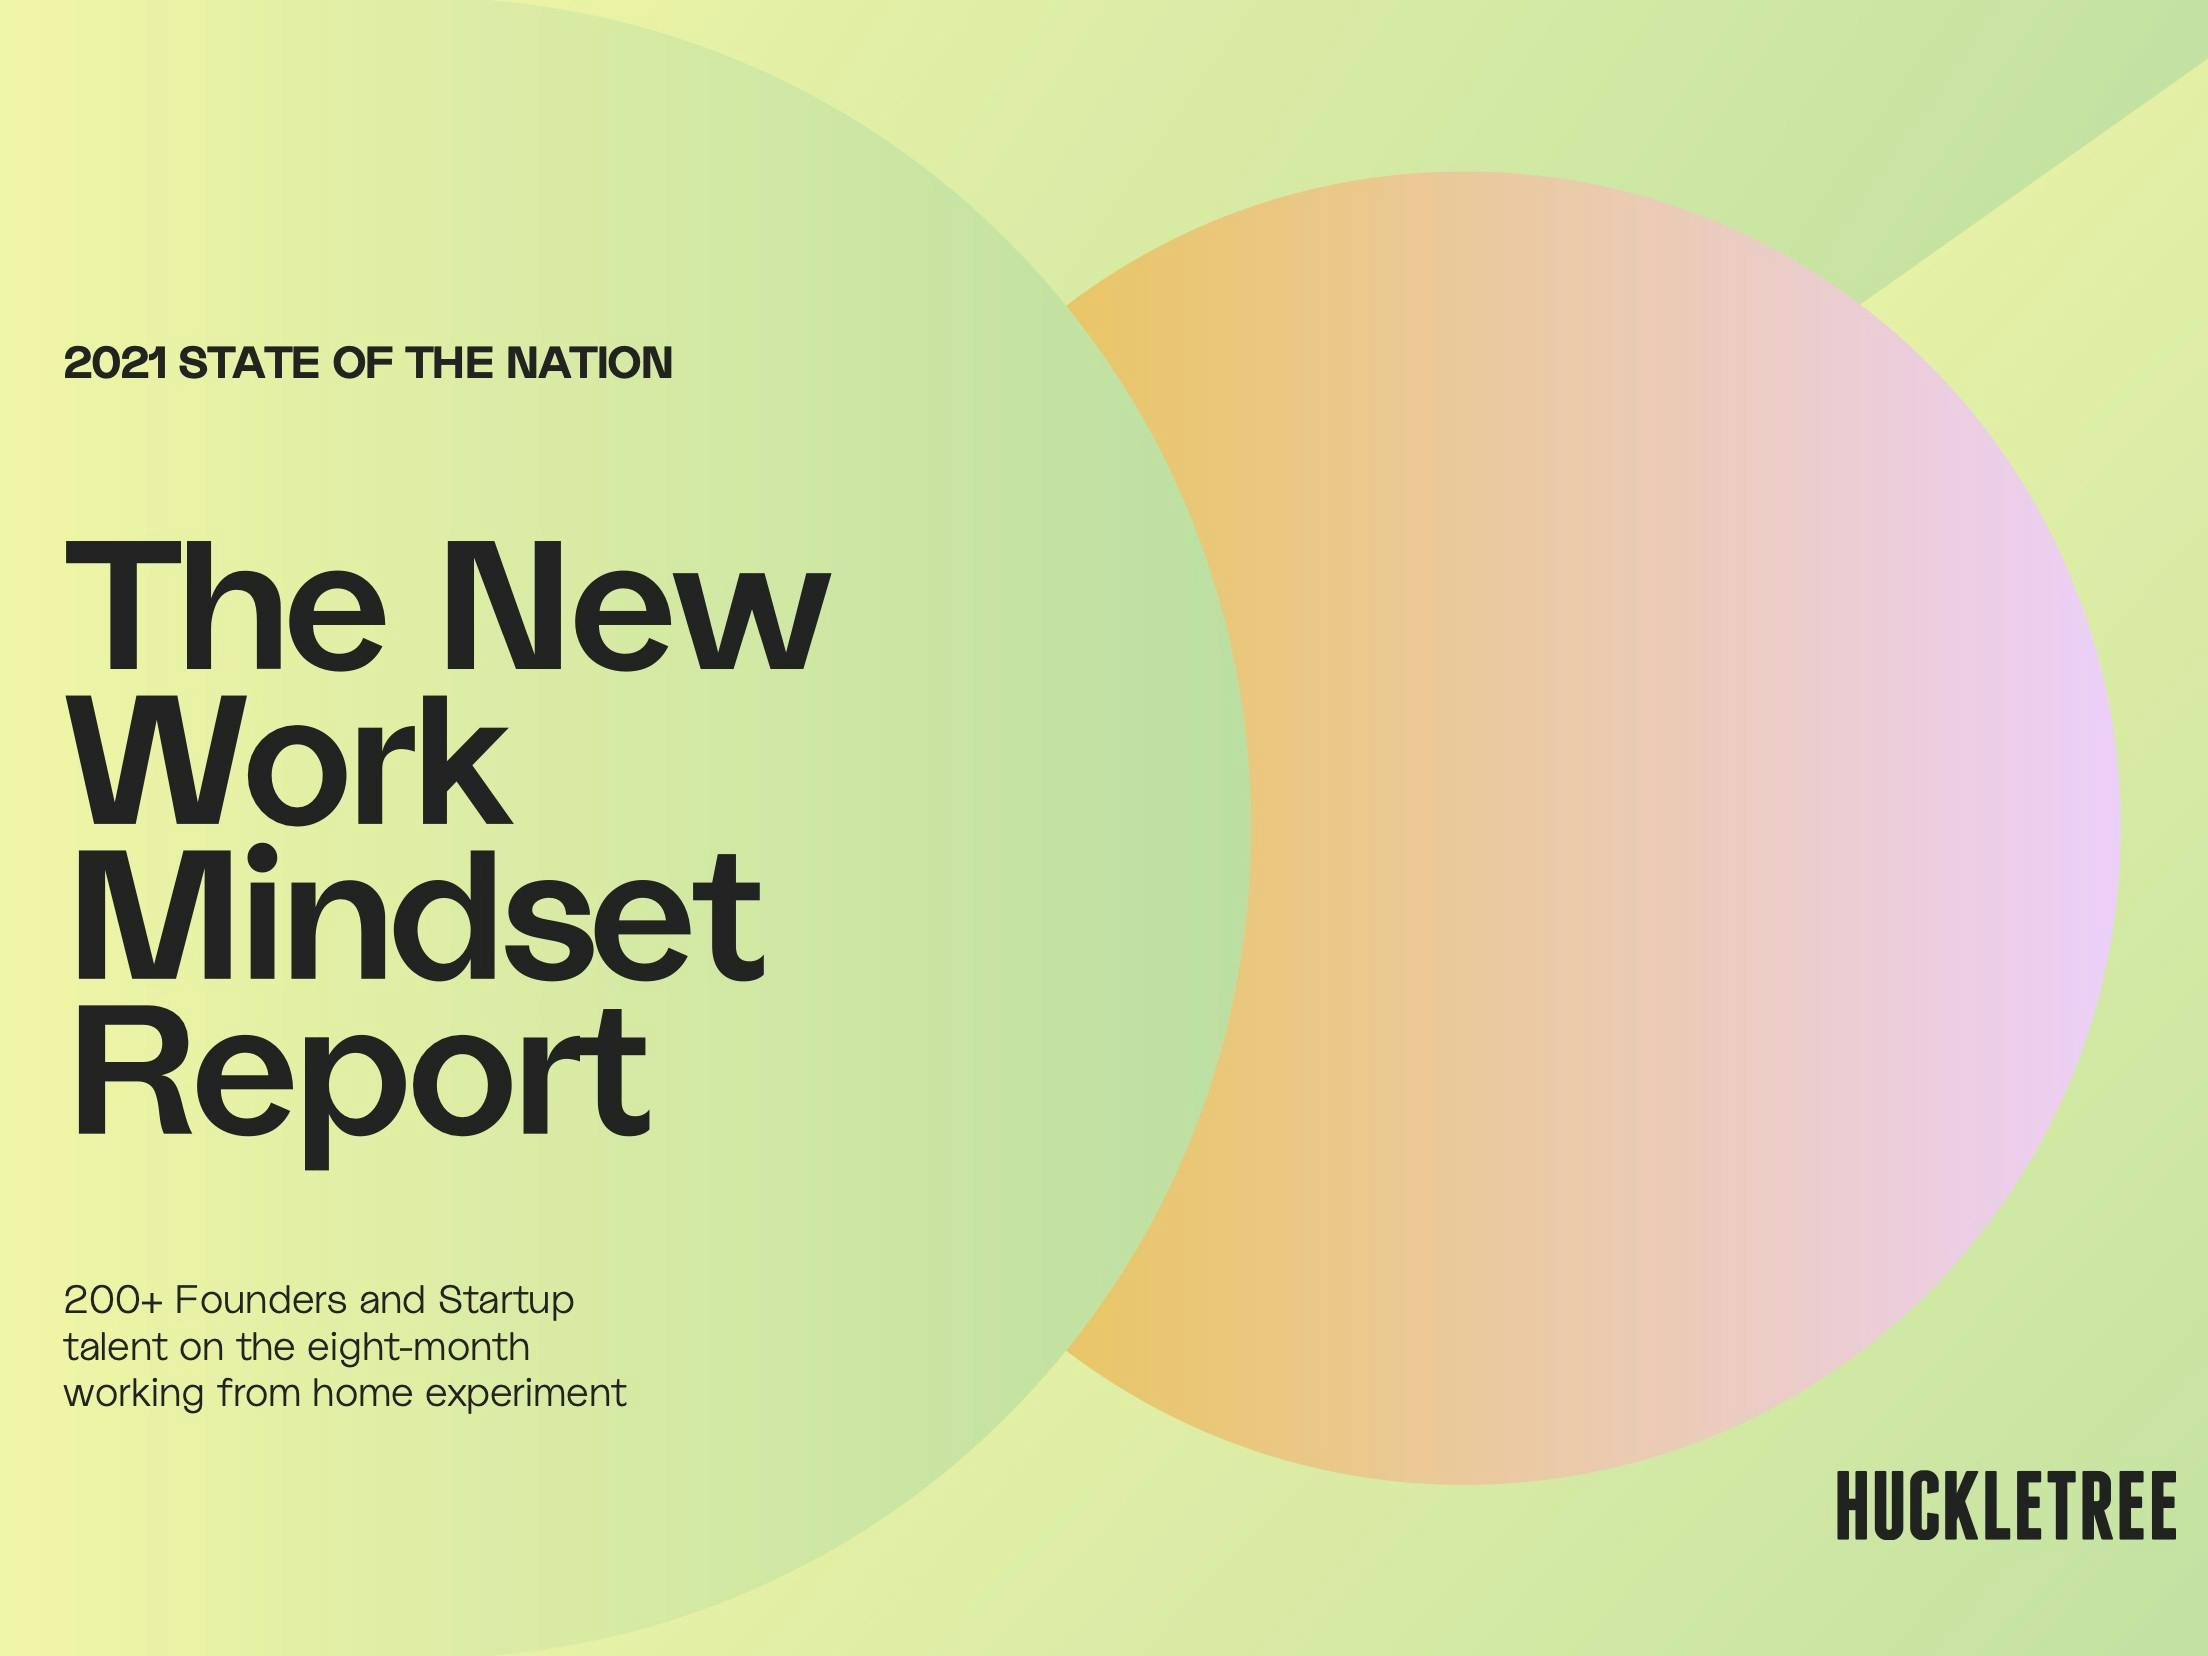 The new work mindset report brand tile